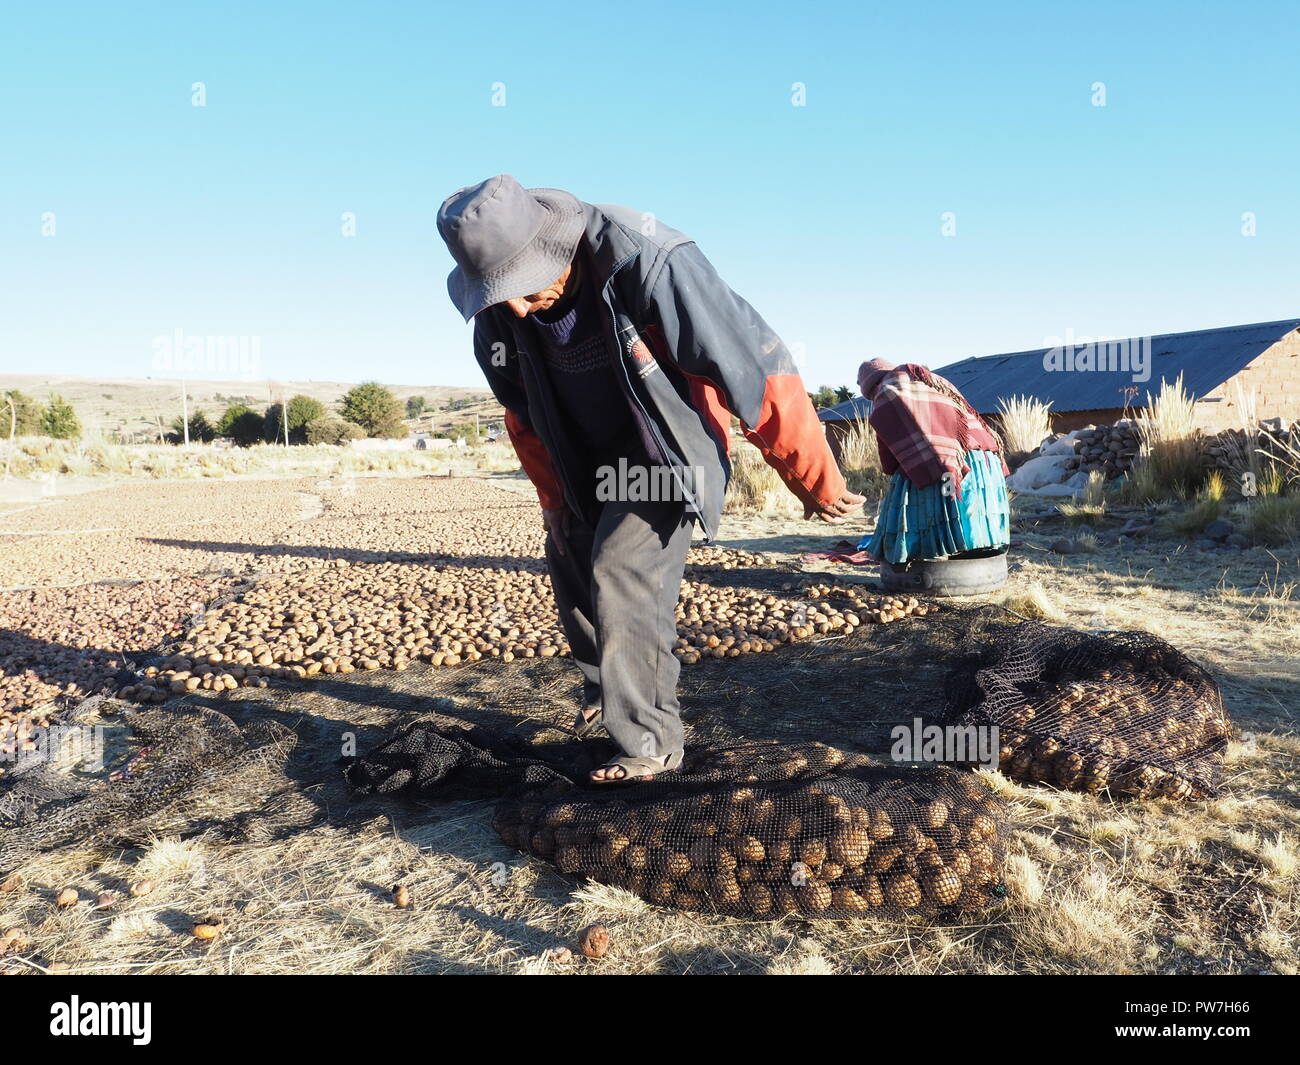 In PERU a variety of potato called Chuño, produced by dehydration through a cycle of exposure to sun and frost and crushing. Stock Photo